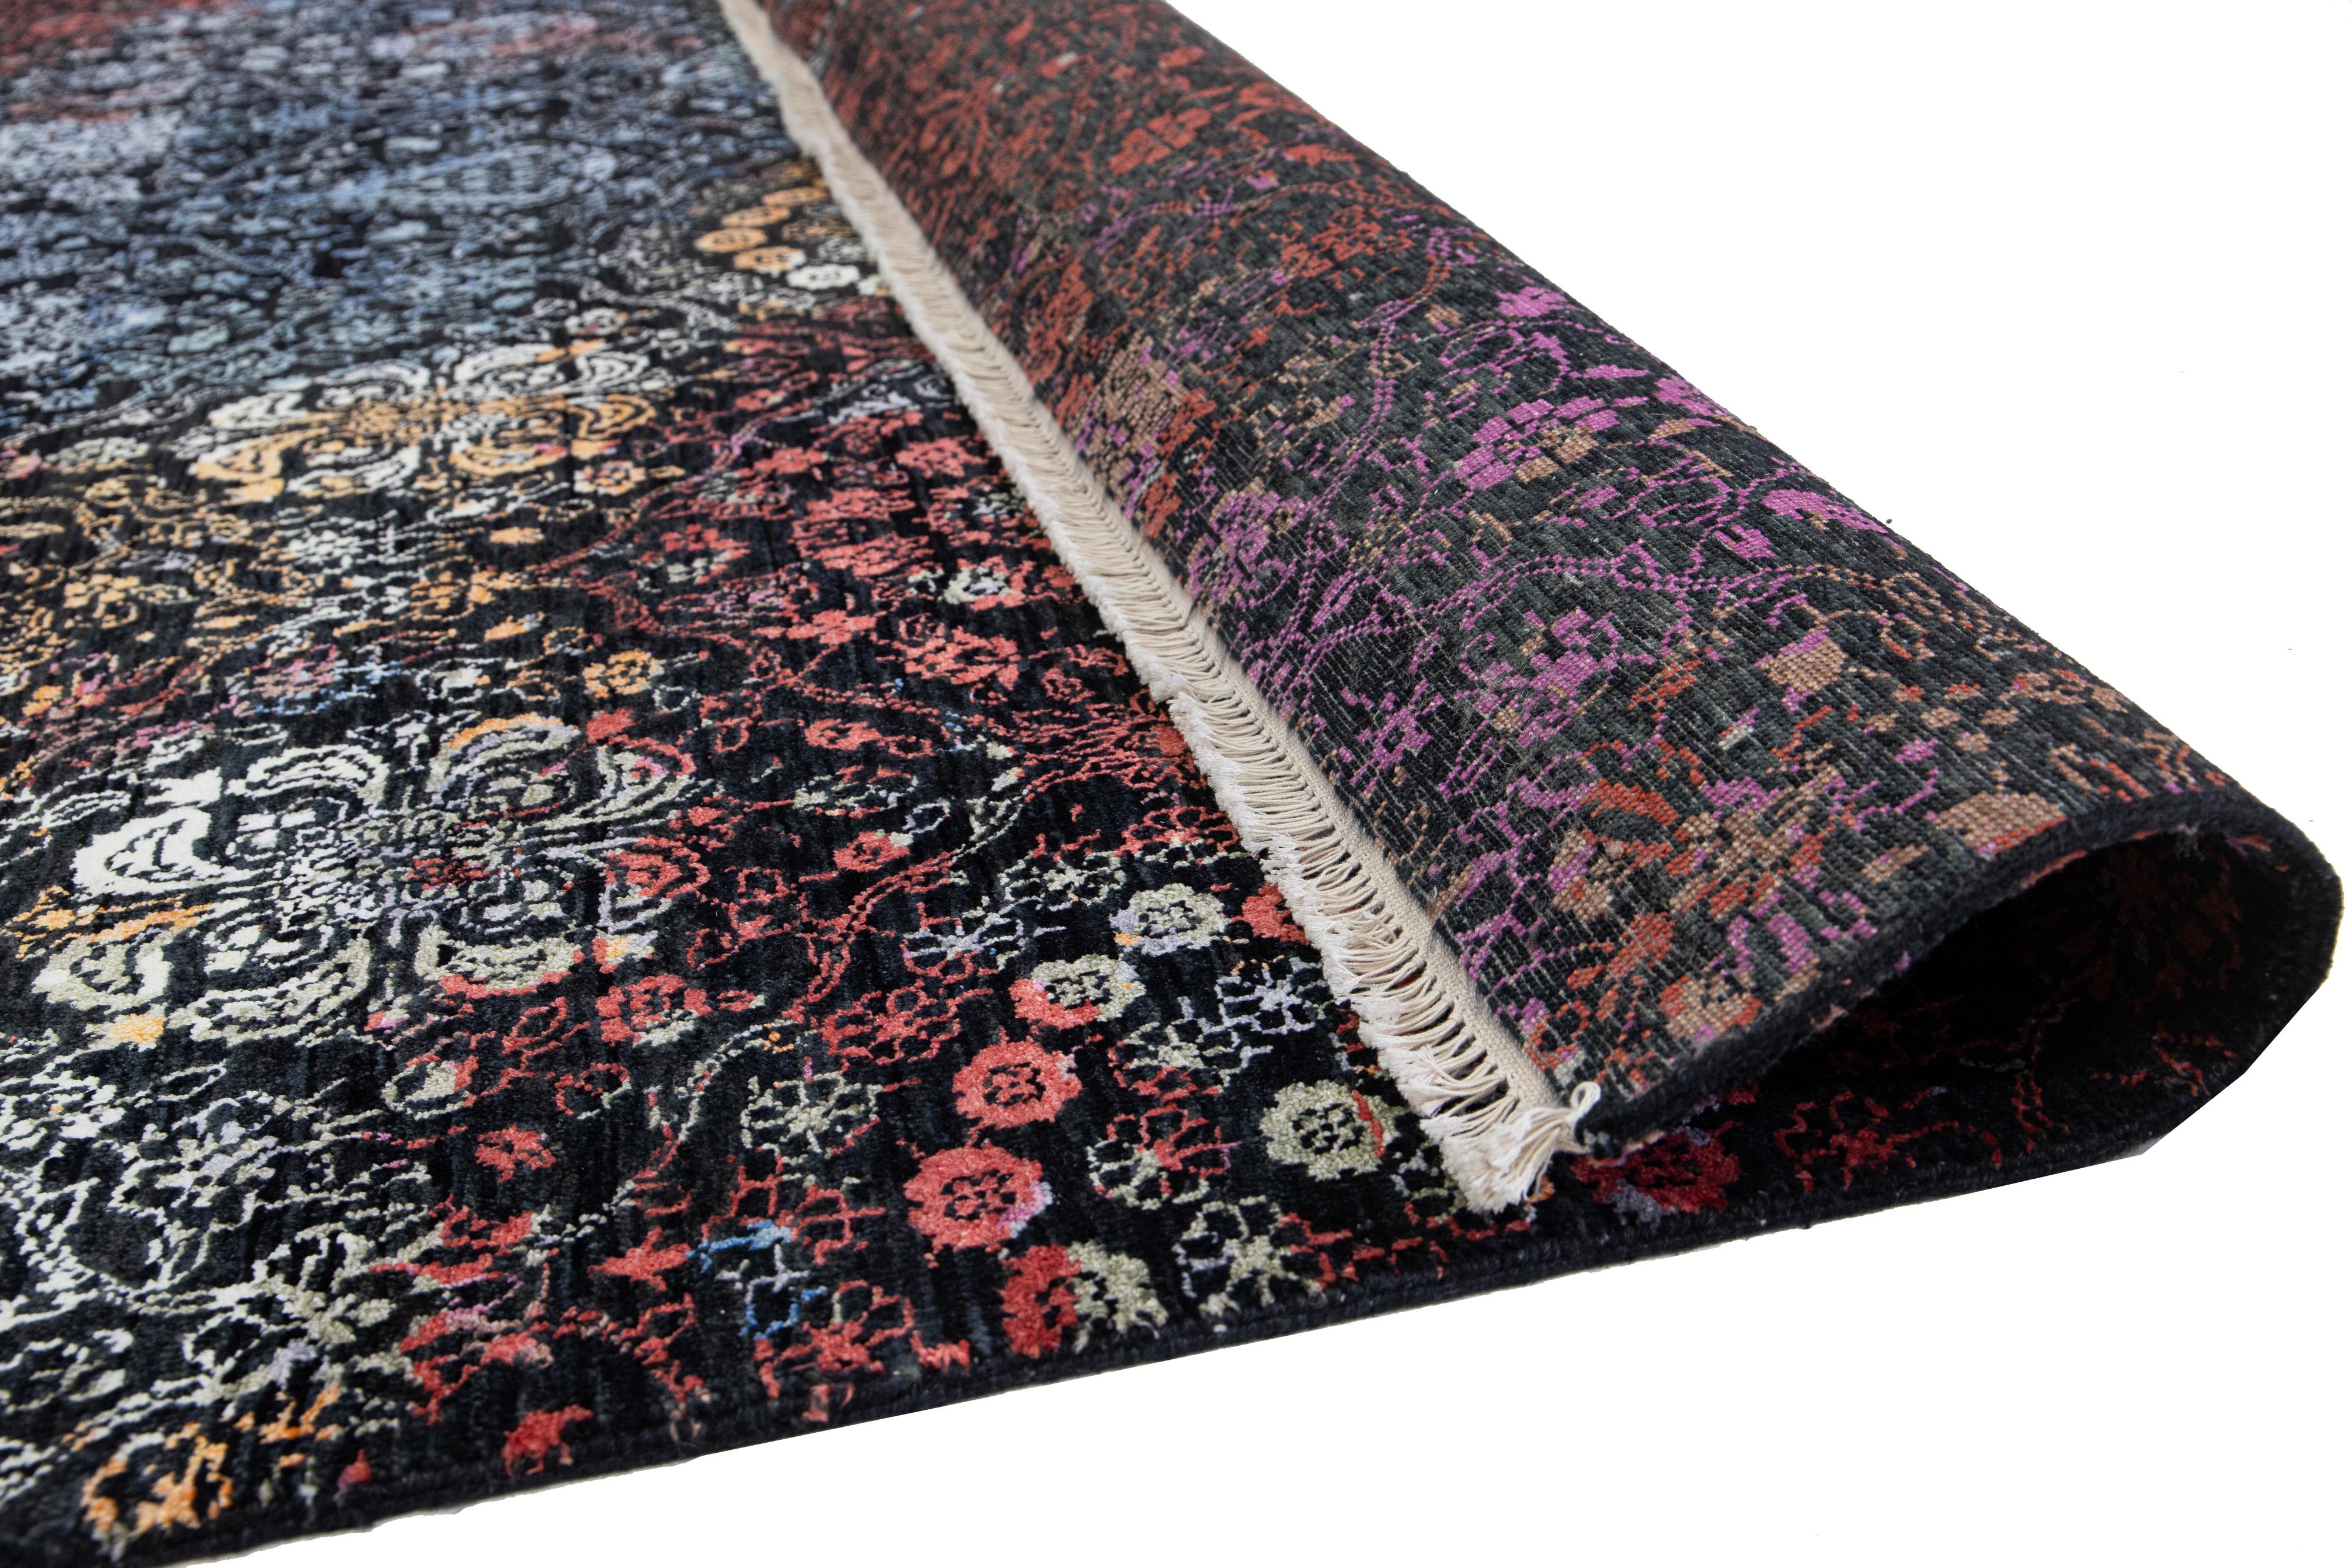 Islamic Allover Transitional Room Size Black Wool Rug  Designed In Blue & Red Colors  For Sale